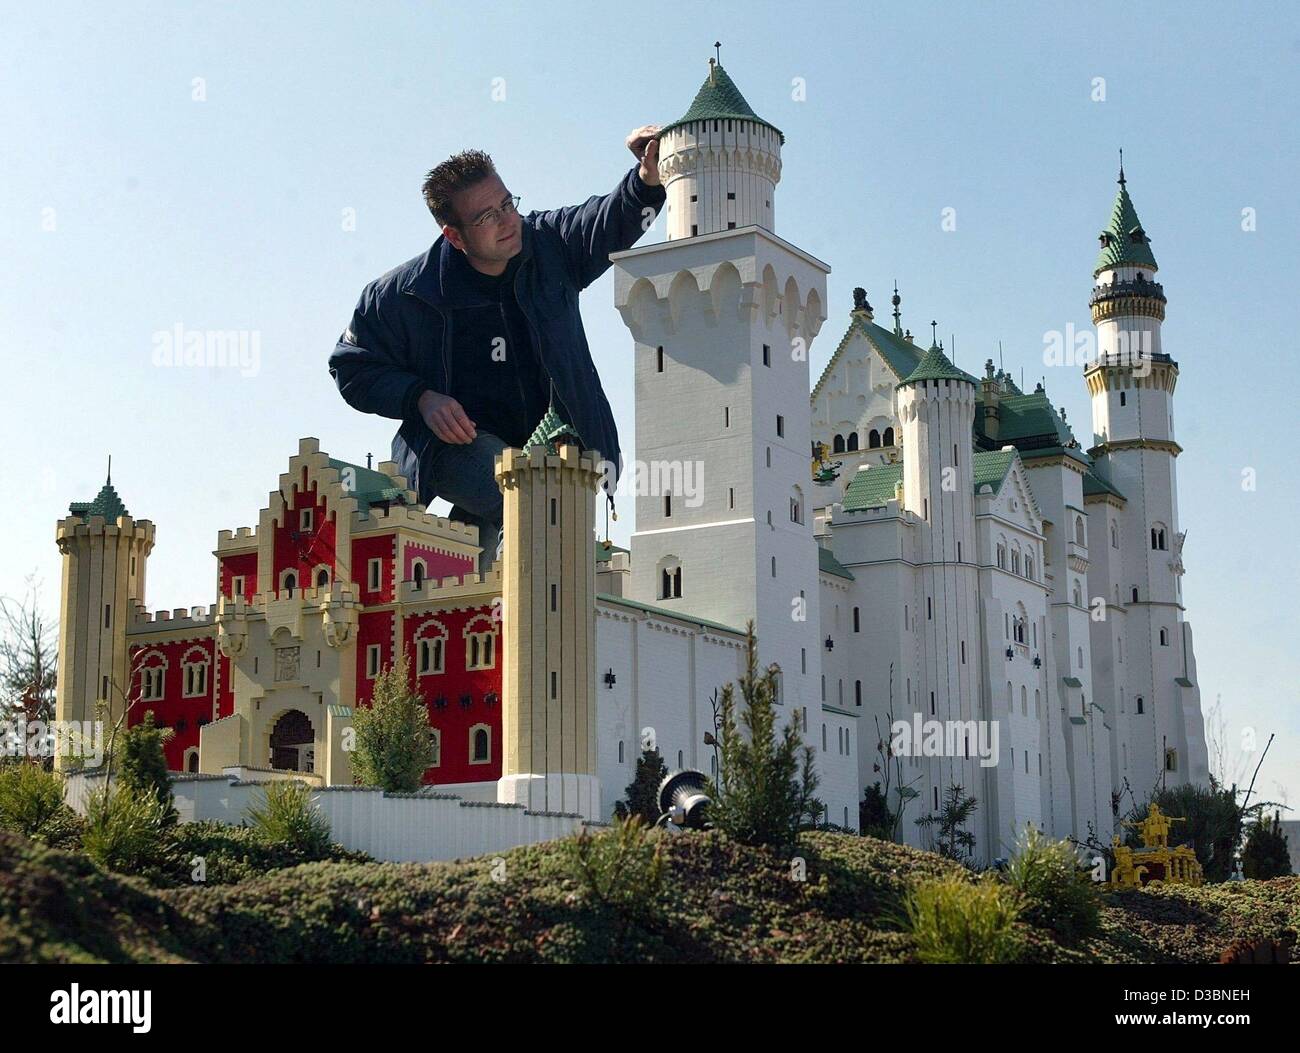 dpa) - Model maker Ilja Schueler puts the finishing touches on the model of Neuschwanstein  Castle built of Lego bricks in Legoland near Guenzburg, Germany, 8 April  2003. The Danish toy group